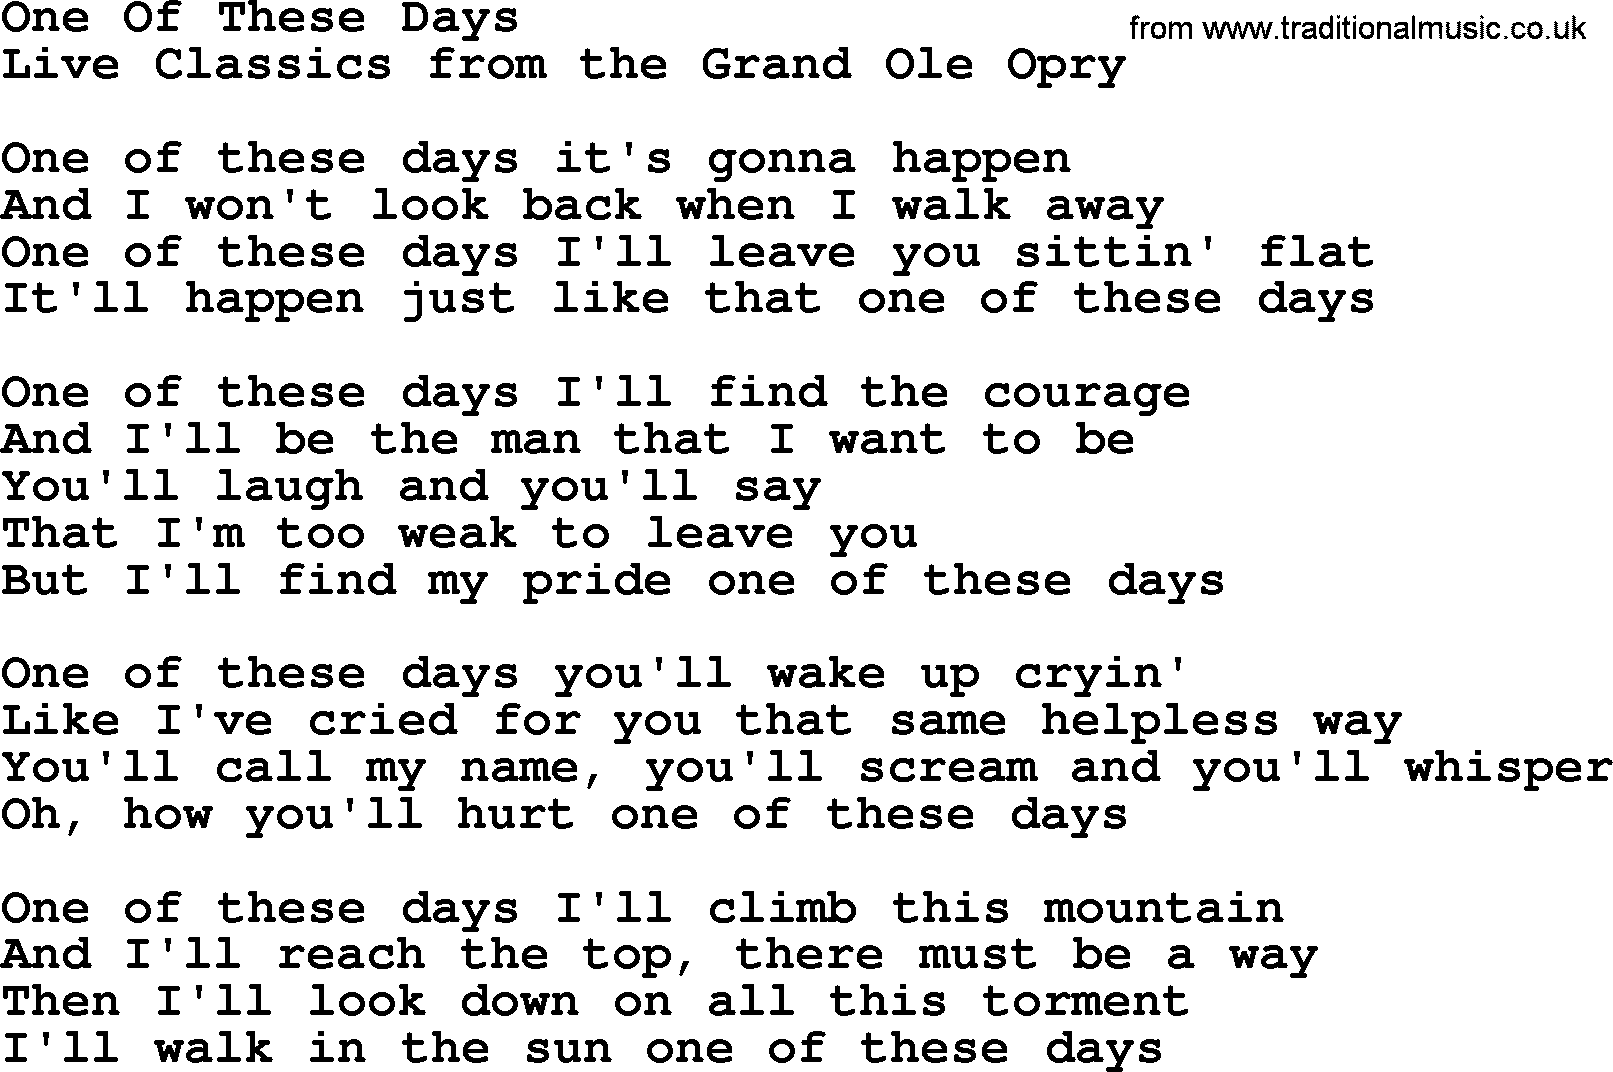 Marty Robbins song: One Of These Days, lyrics